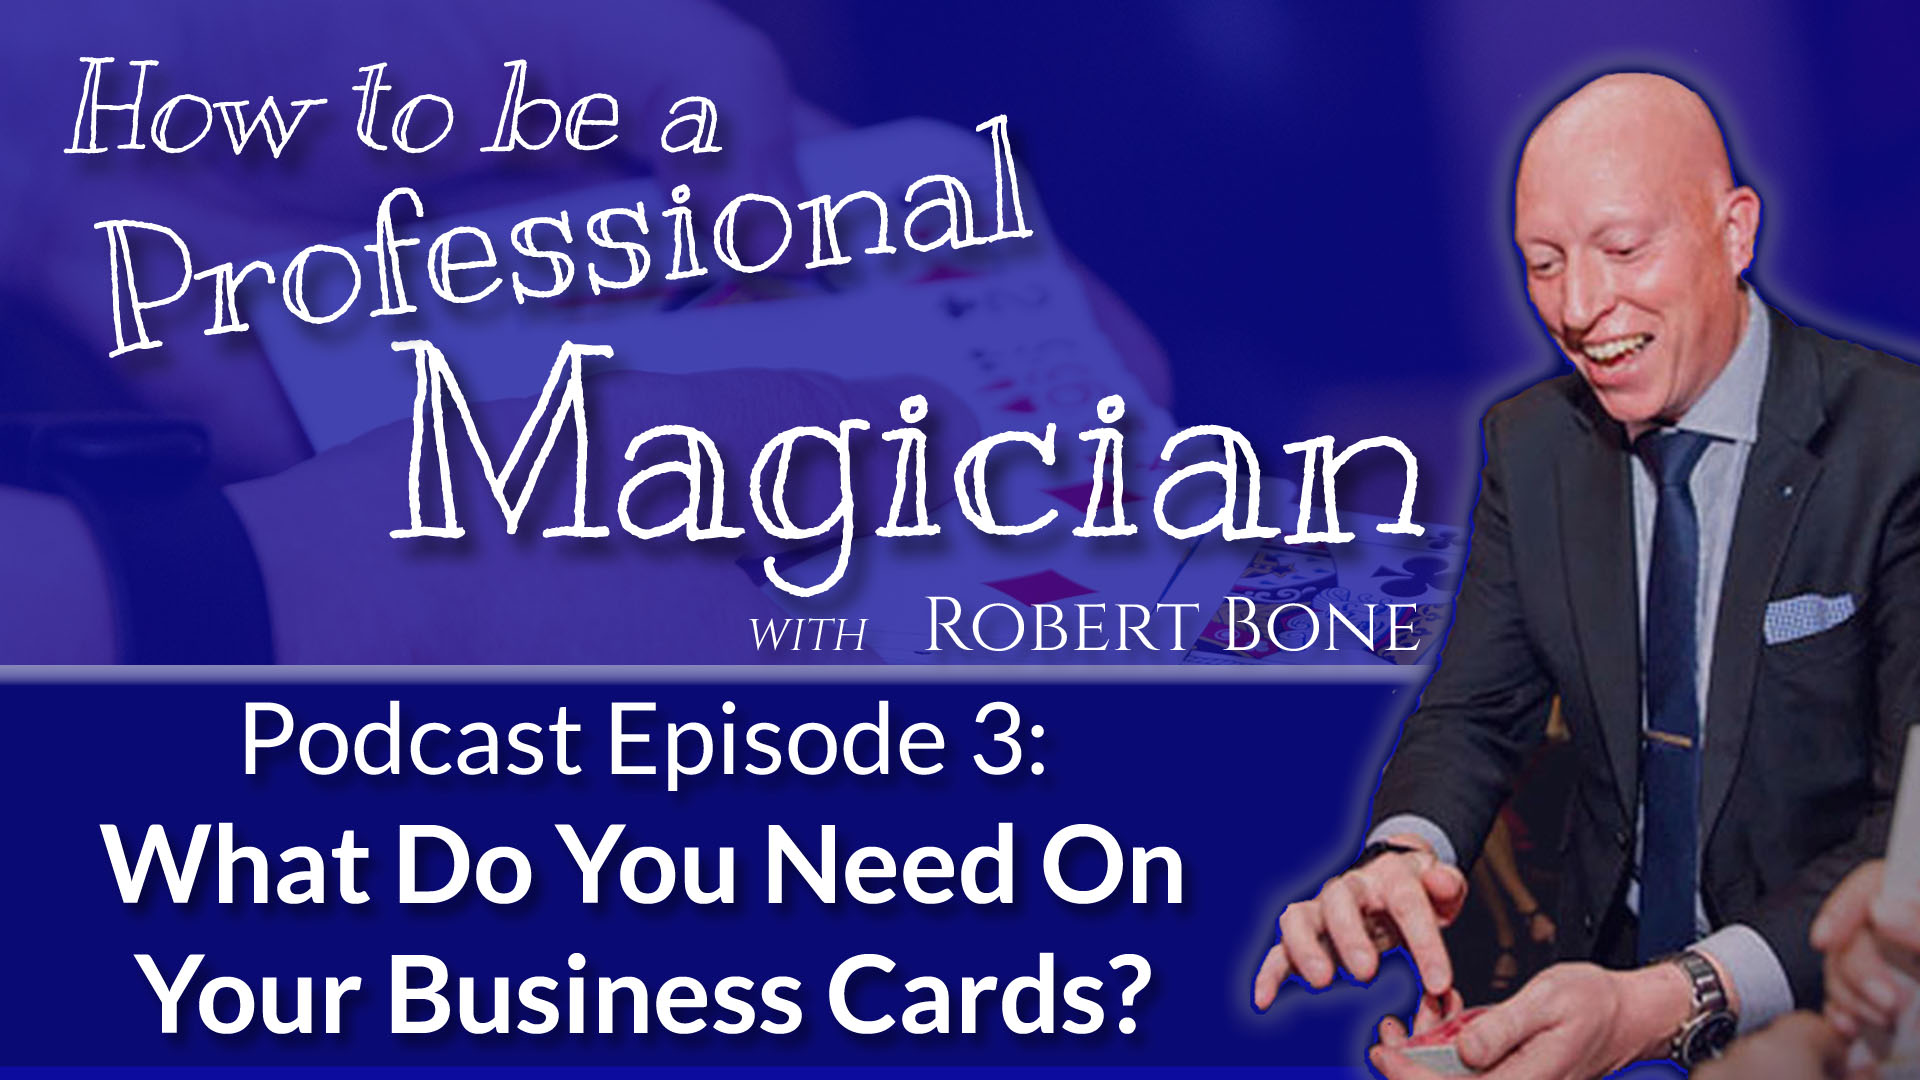 HTBAPM003-what-do-you-need-on-your-business-cards